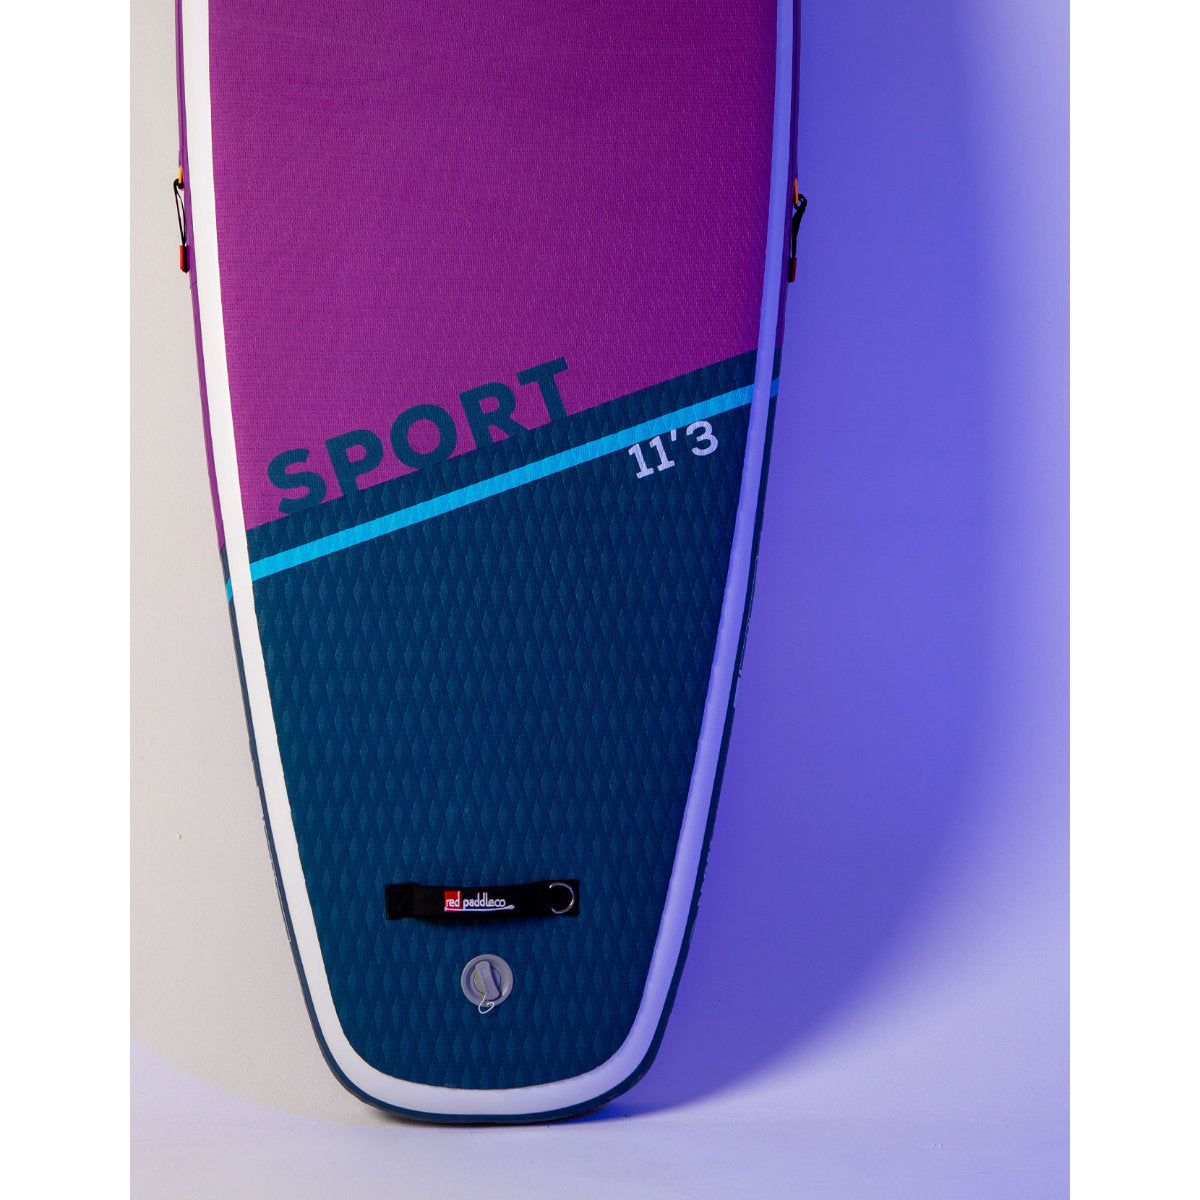 
                  
                    Red Paddle Co. 11'3 Sport Package Purple 2022 - FREE Shipping 🛻 ** 1-2 WEEKS  🚚**
                  
                